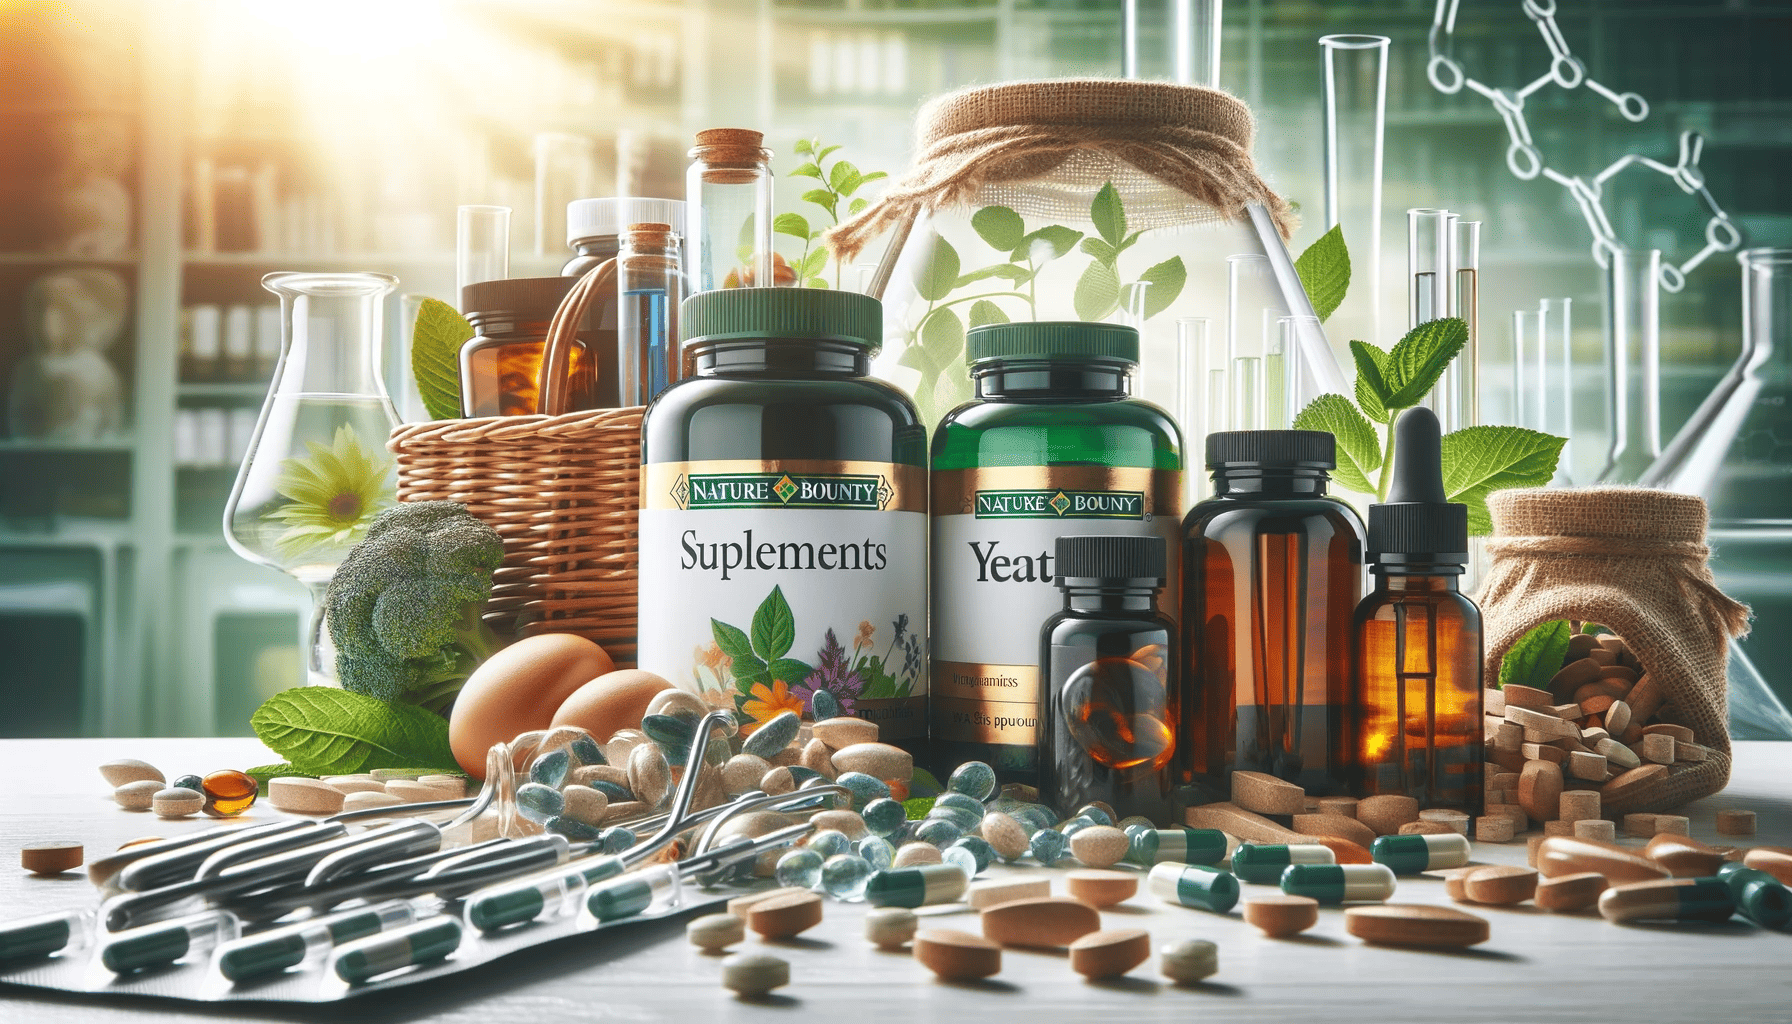 Nature's Bounty's reputation shines bright, offering a wide range of high-quality supplements at accessible prices. They're a popular choice for health-conscious folks thanks to their commitment to trusted ingredients, rigorous testing, and positive customer reviews.